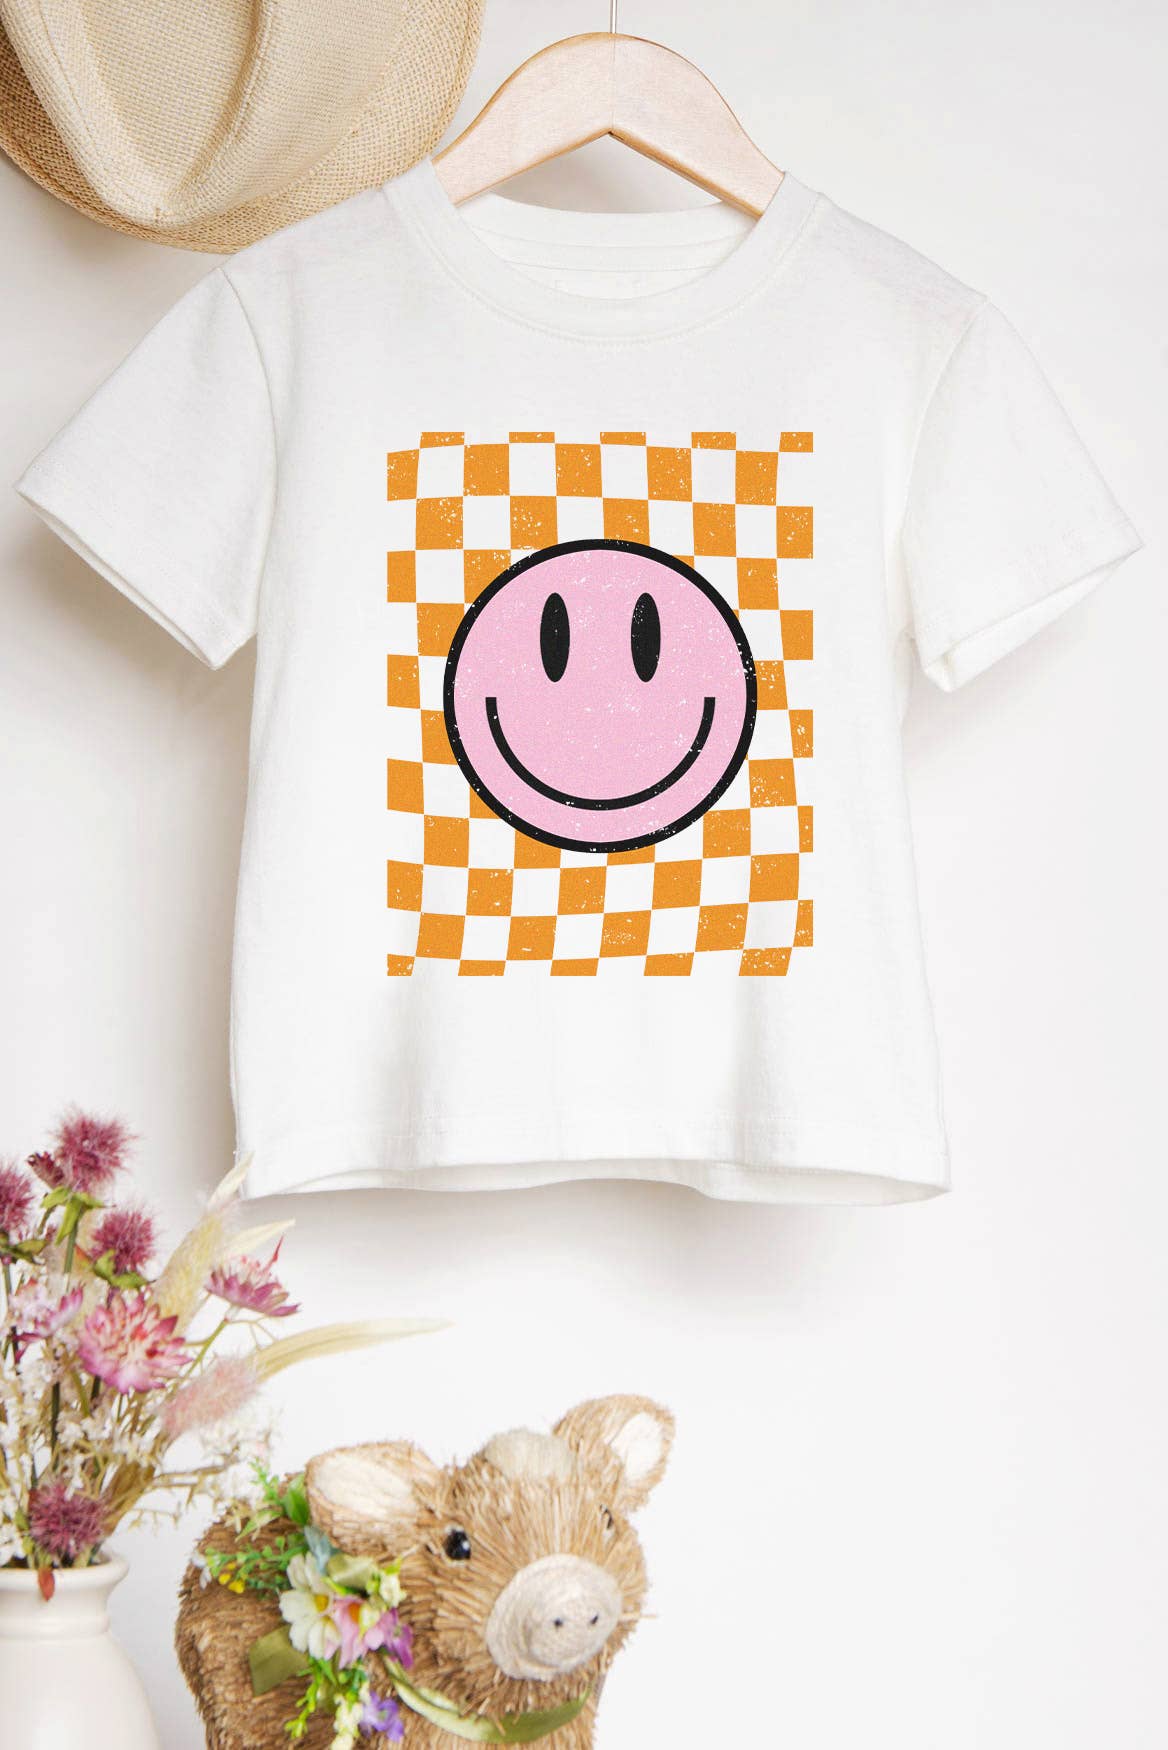 KIDS PLAID SMILE FACE GRAPHIC TEES